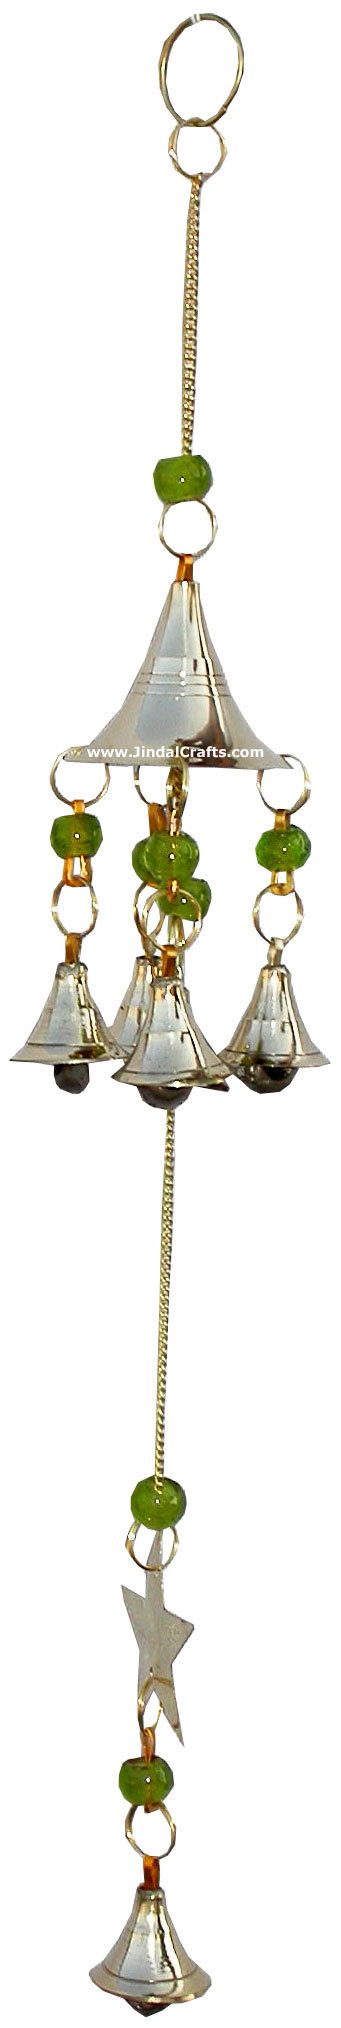 Brass Wind Chimes Handmade Home Decoration India Crafts